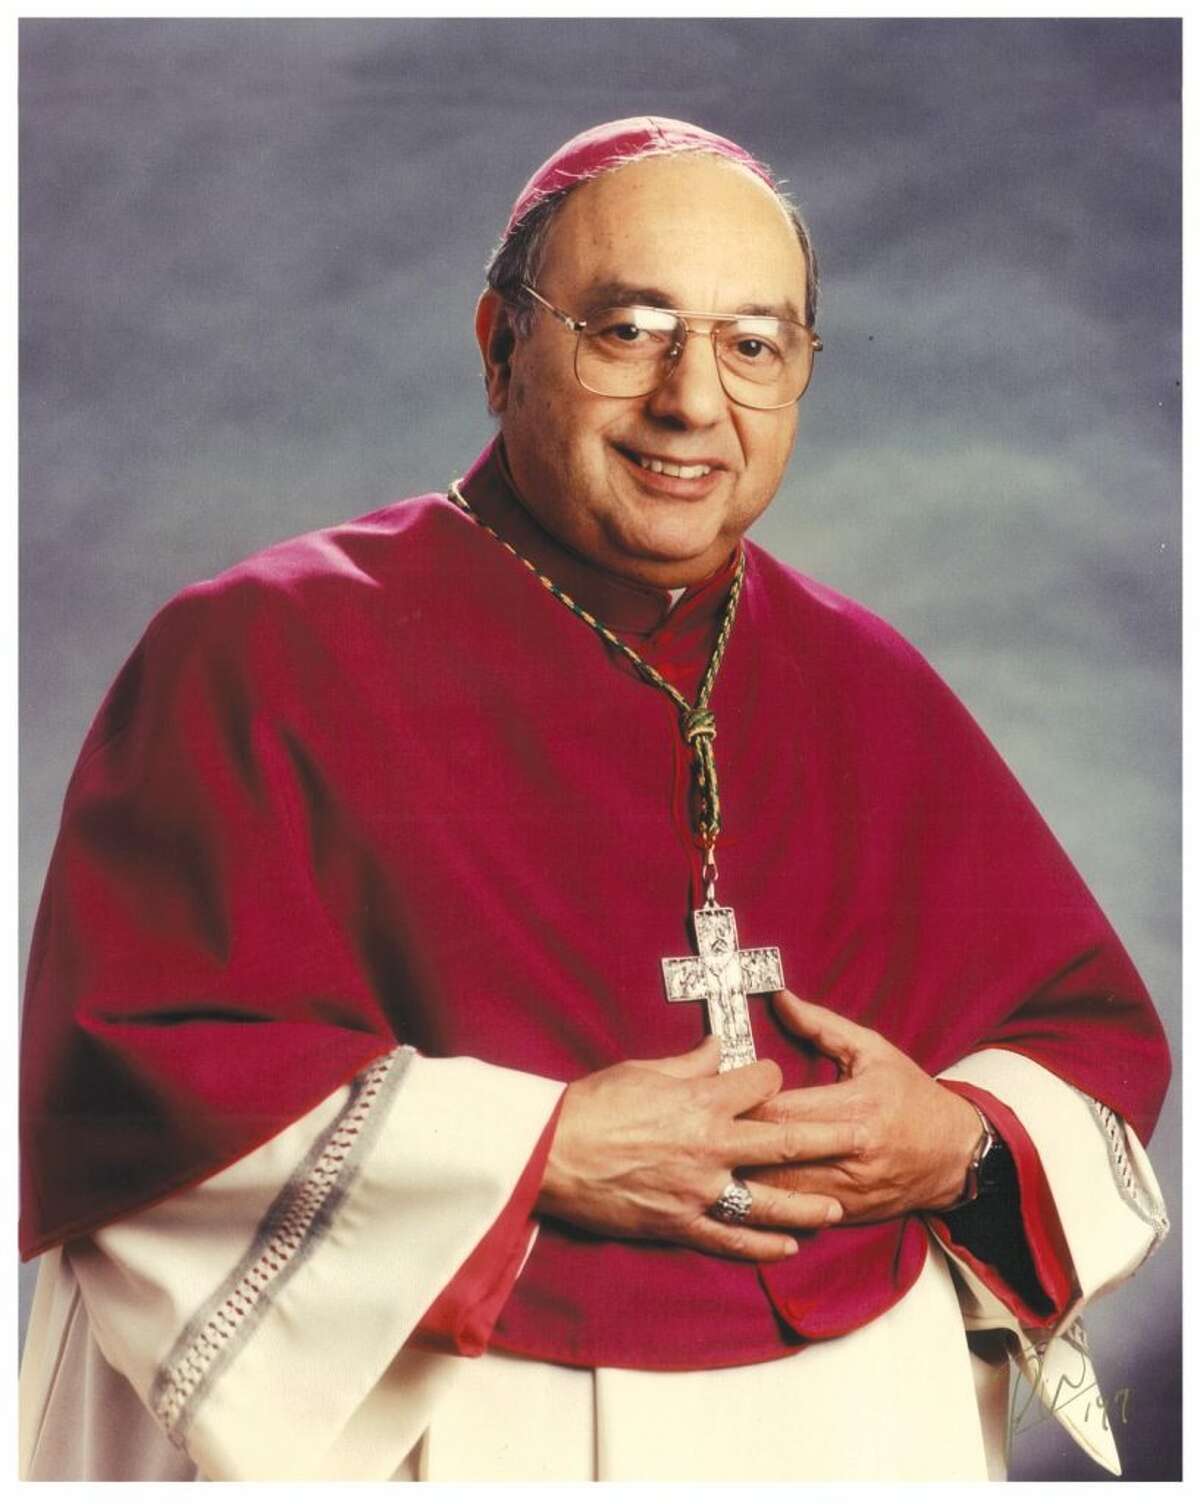 Bishop Joseph A. Galante, fourth Bishop of the Catholic Diocese of Beaumont, died May 25 at 80.